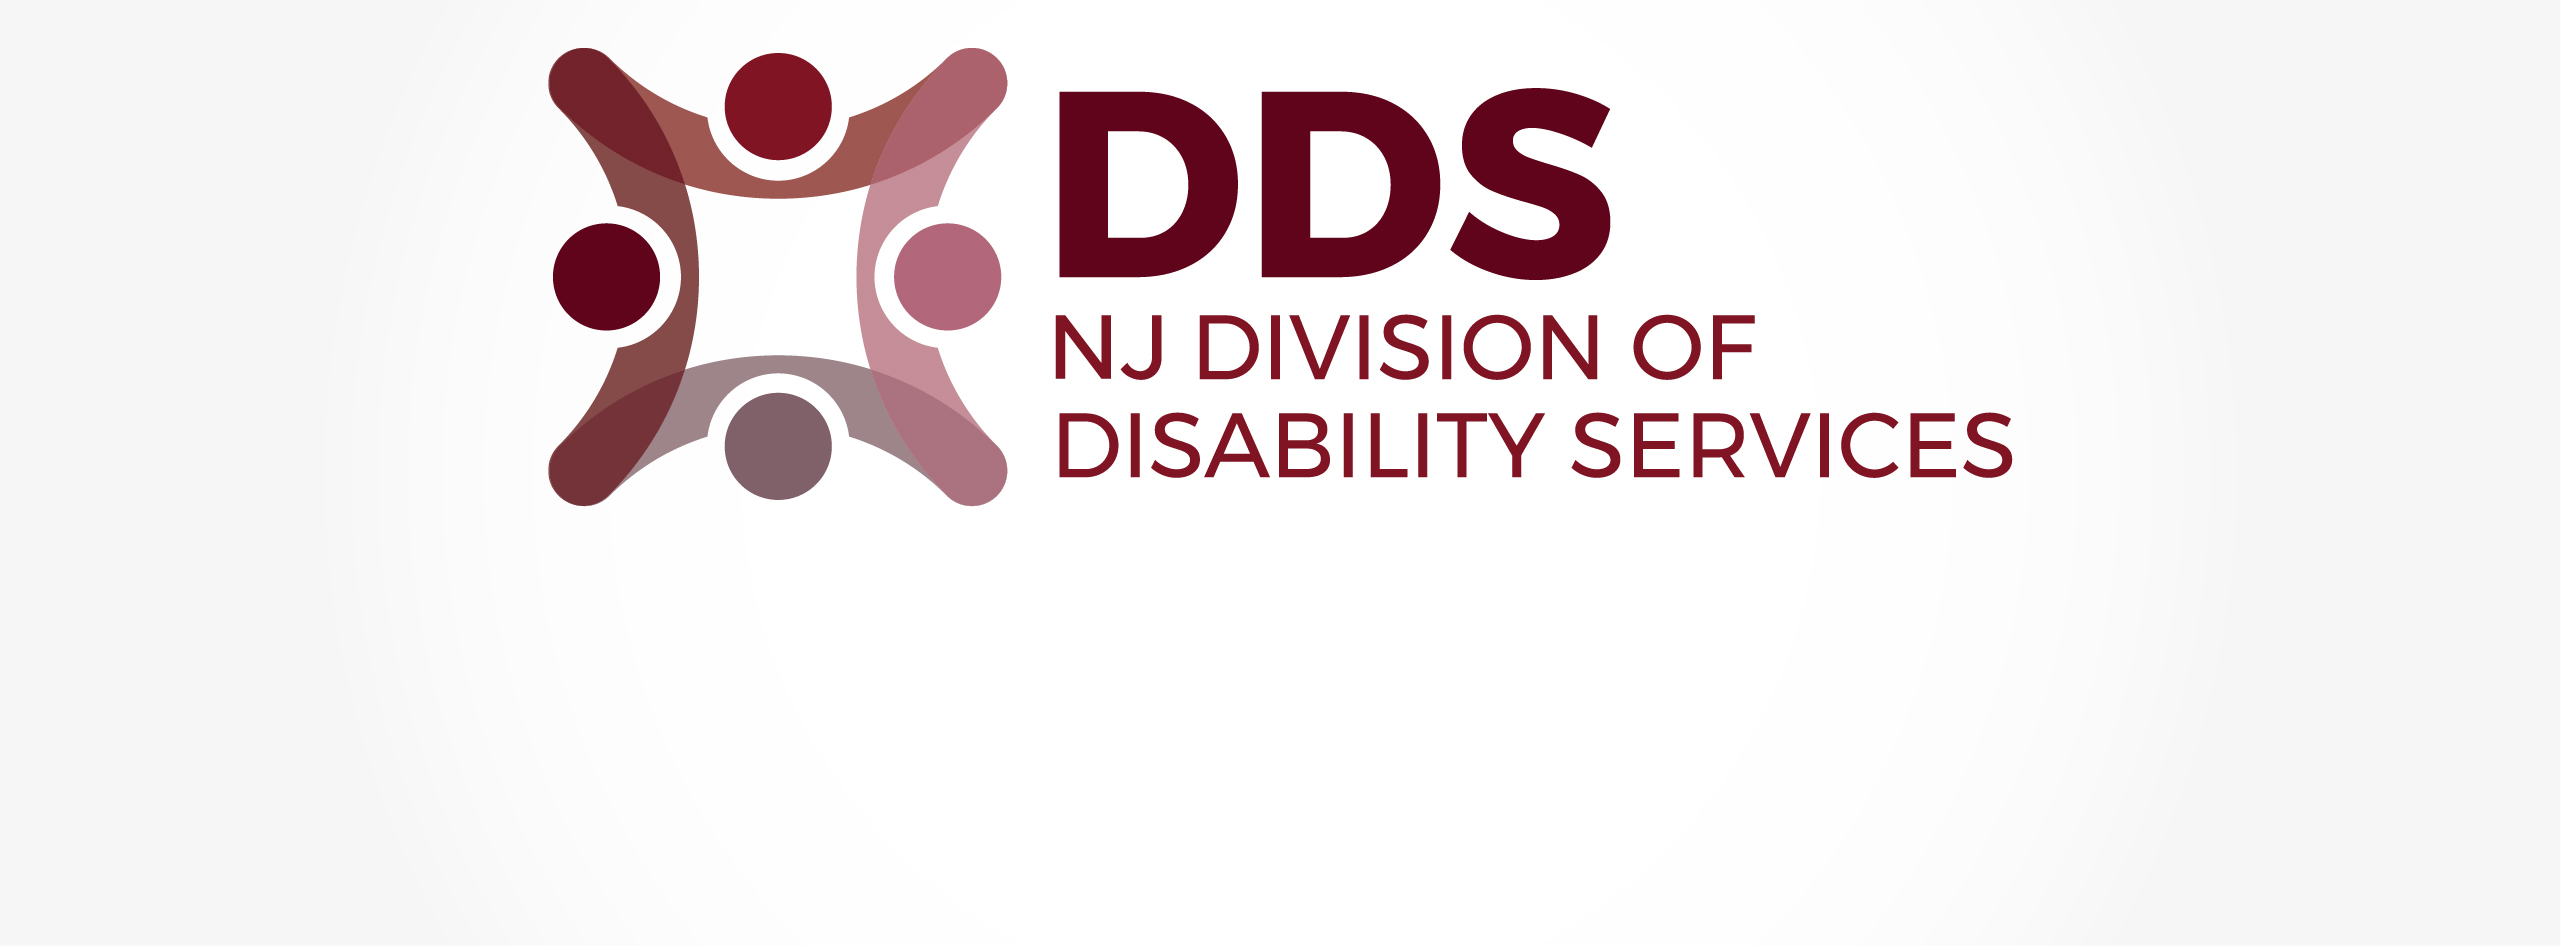 DDS NJ Division of Disability Services Logo: Four individuals intersecting equally sized and spaced representing individuality and equality with the overlapping of hands representative of community and support.